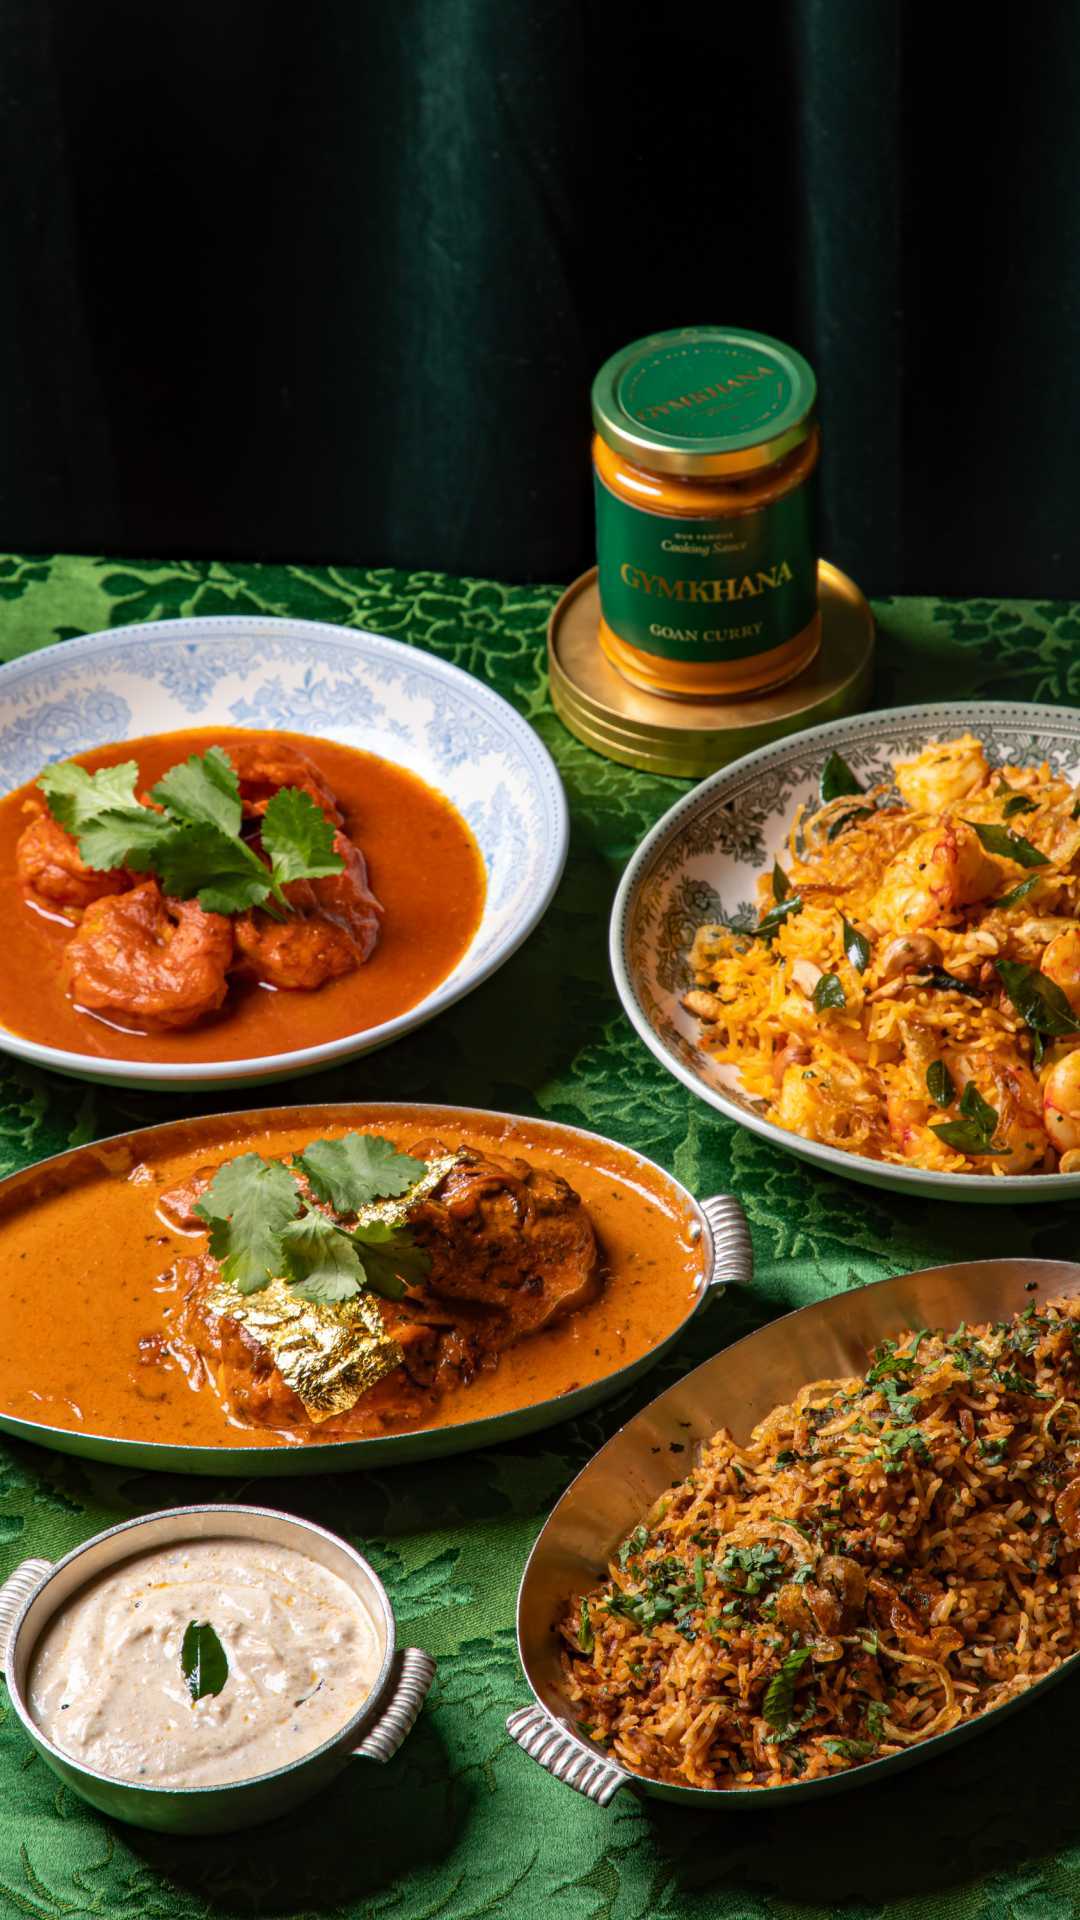 A spread of curries made using the new range of Indian pantry staples from Gymkhana Fine Foods